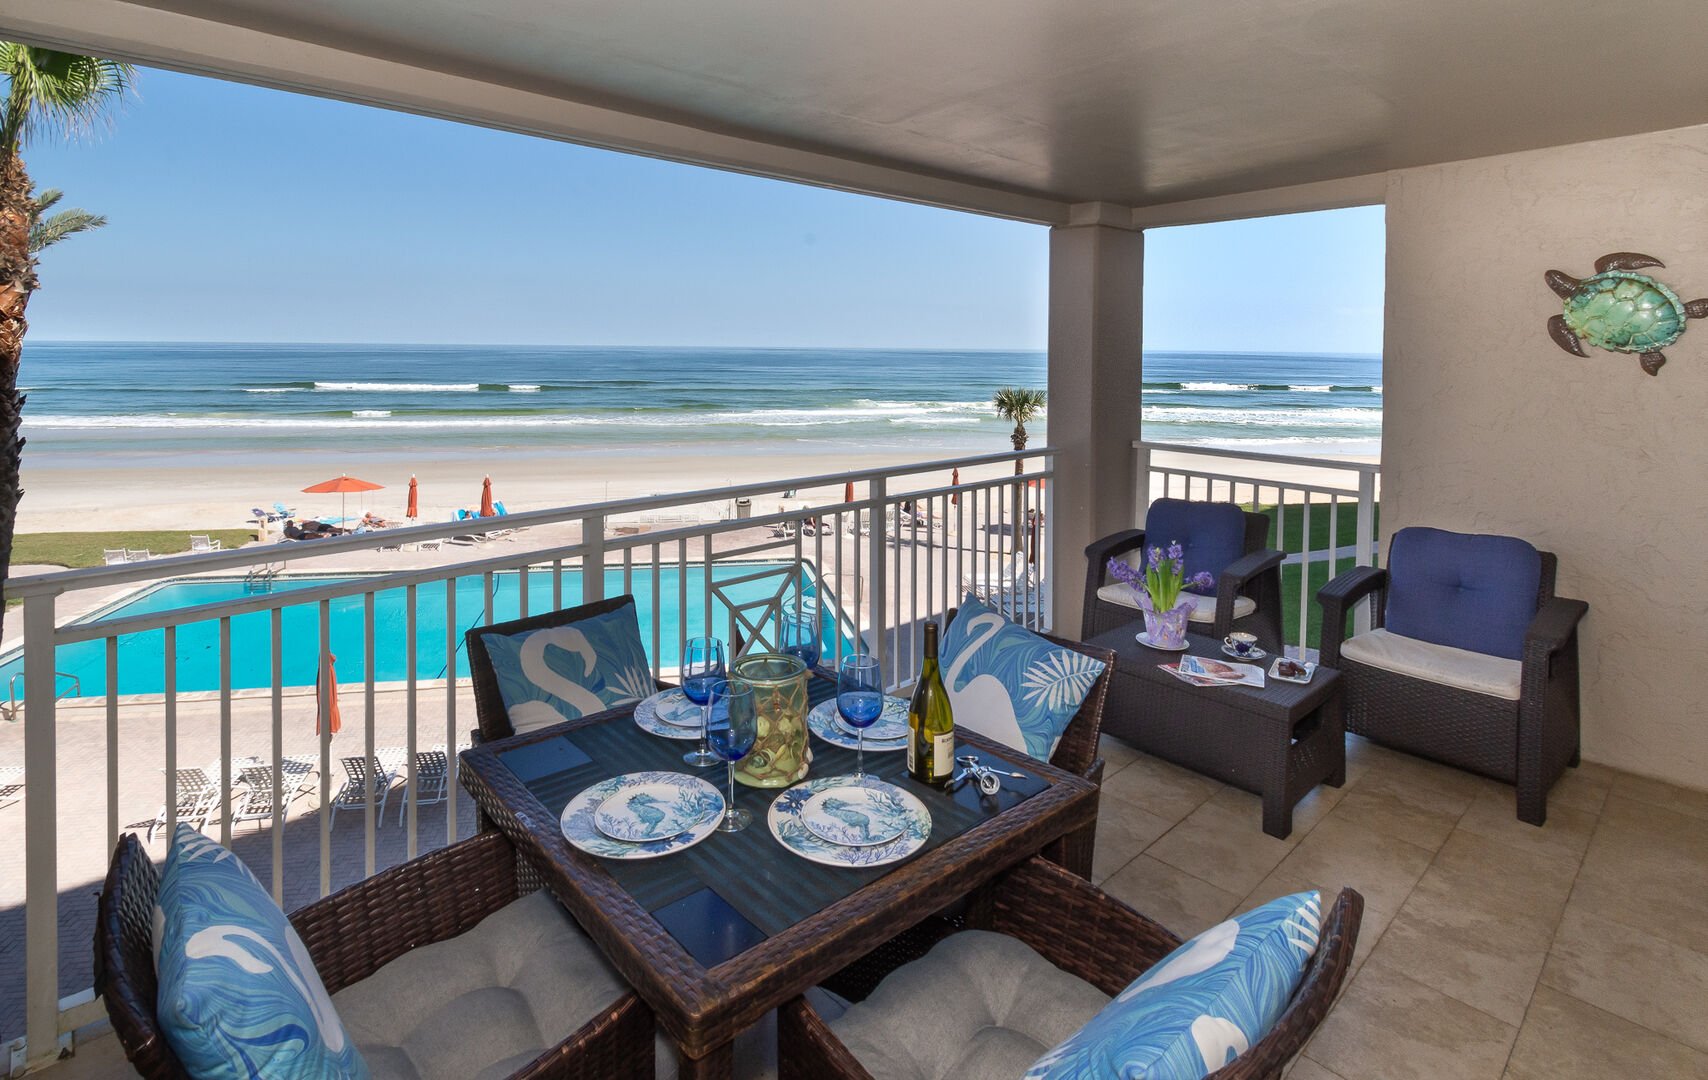 Enjoy breathtaking views of the car free beach from this lovely 3 bedroom 3 bath condo.